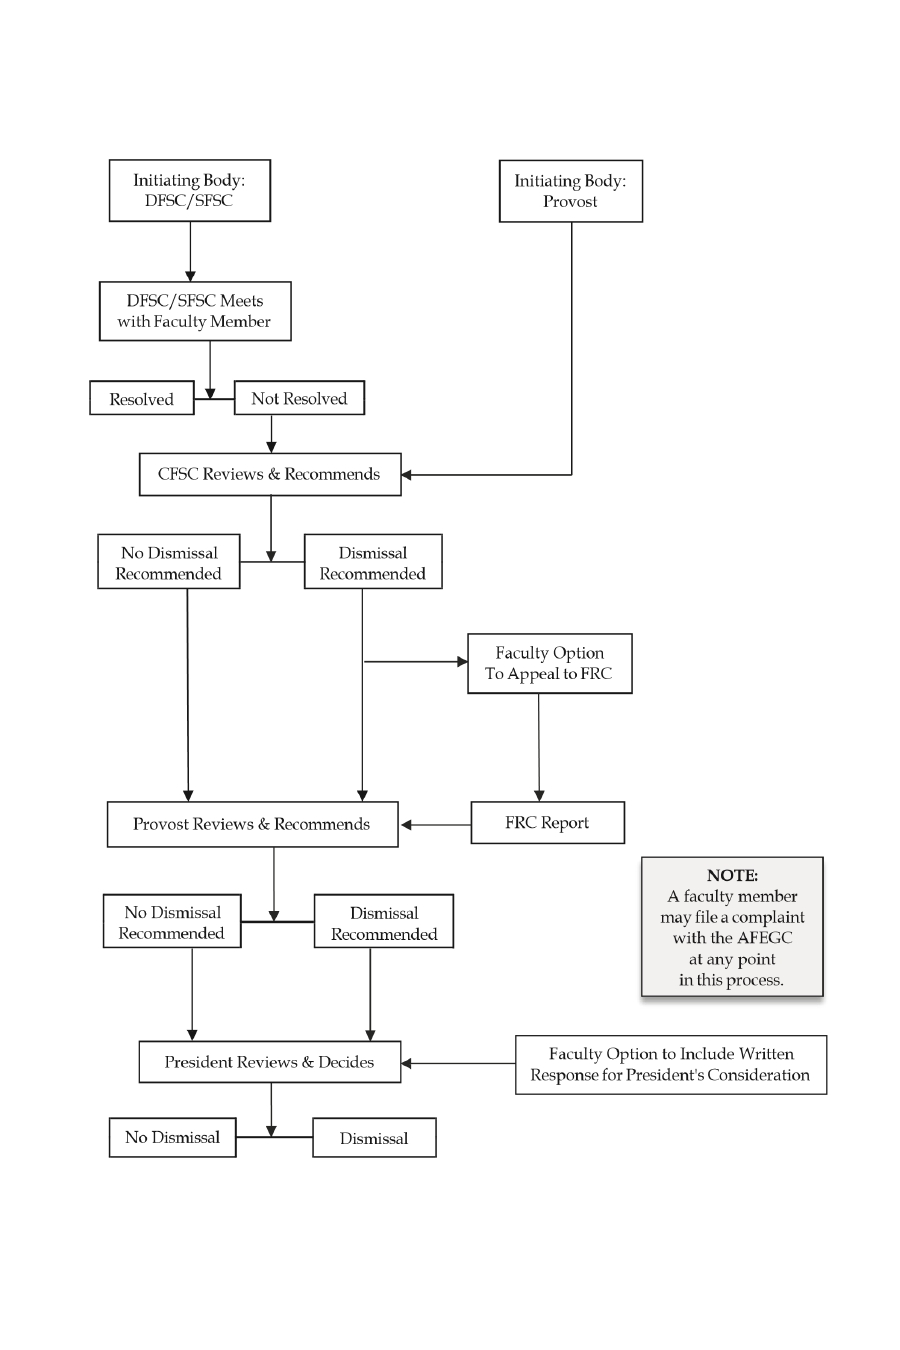 Overview of the Dismissal Process Flowchart